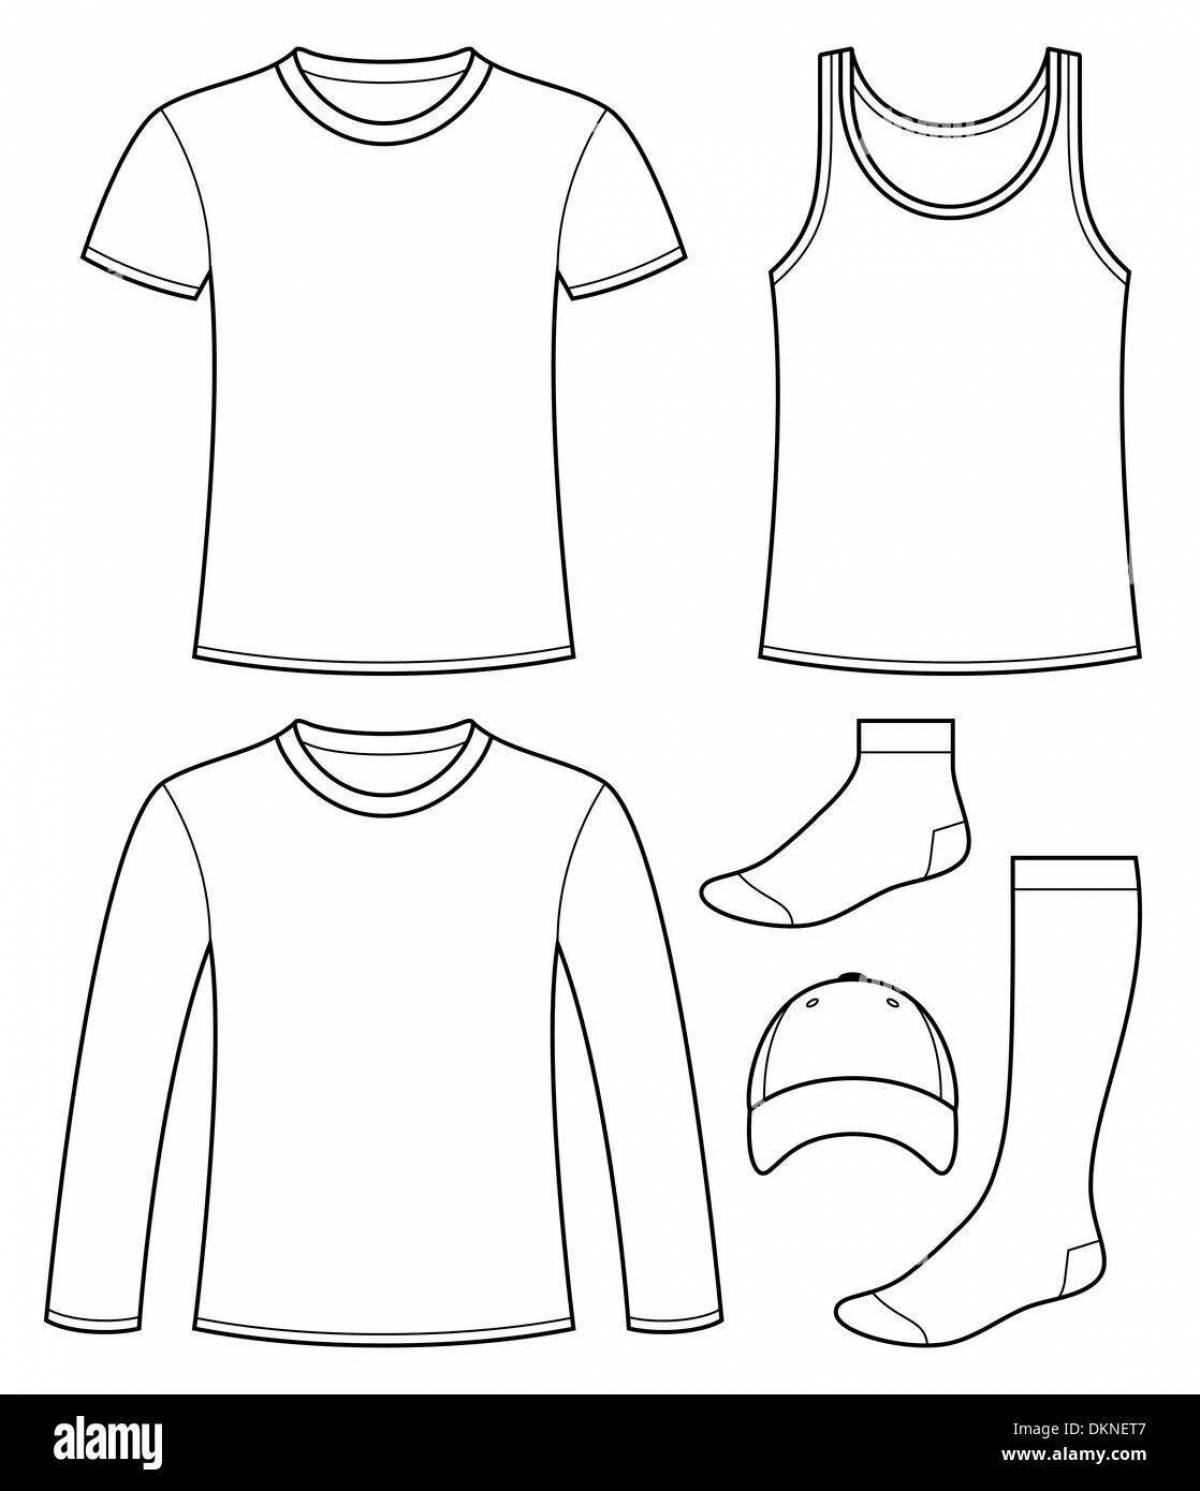 T-shirt coloring pages for kids